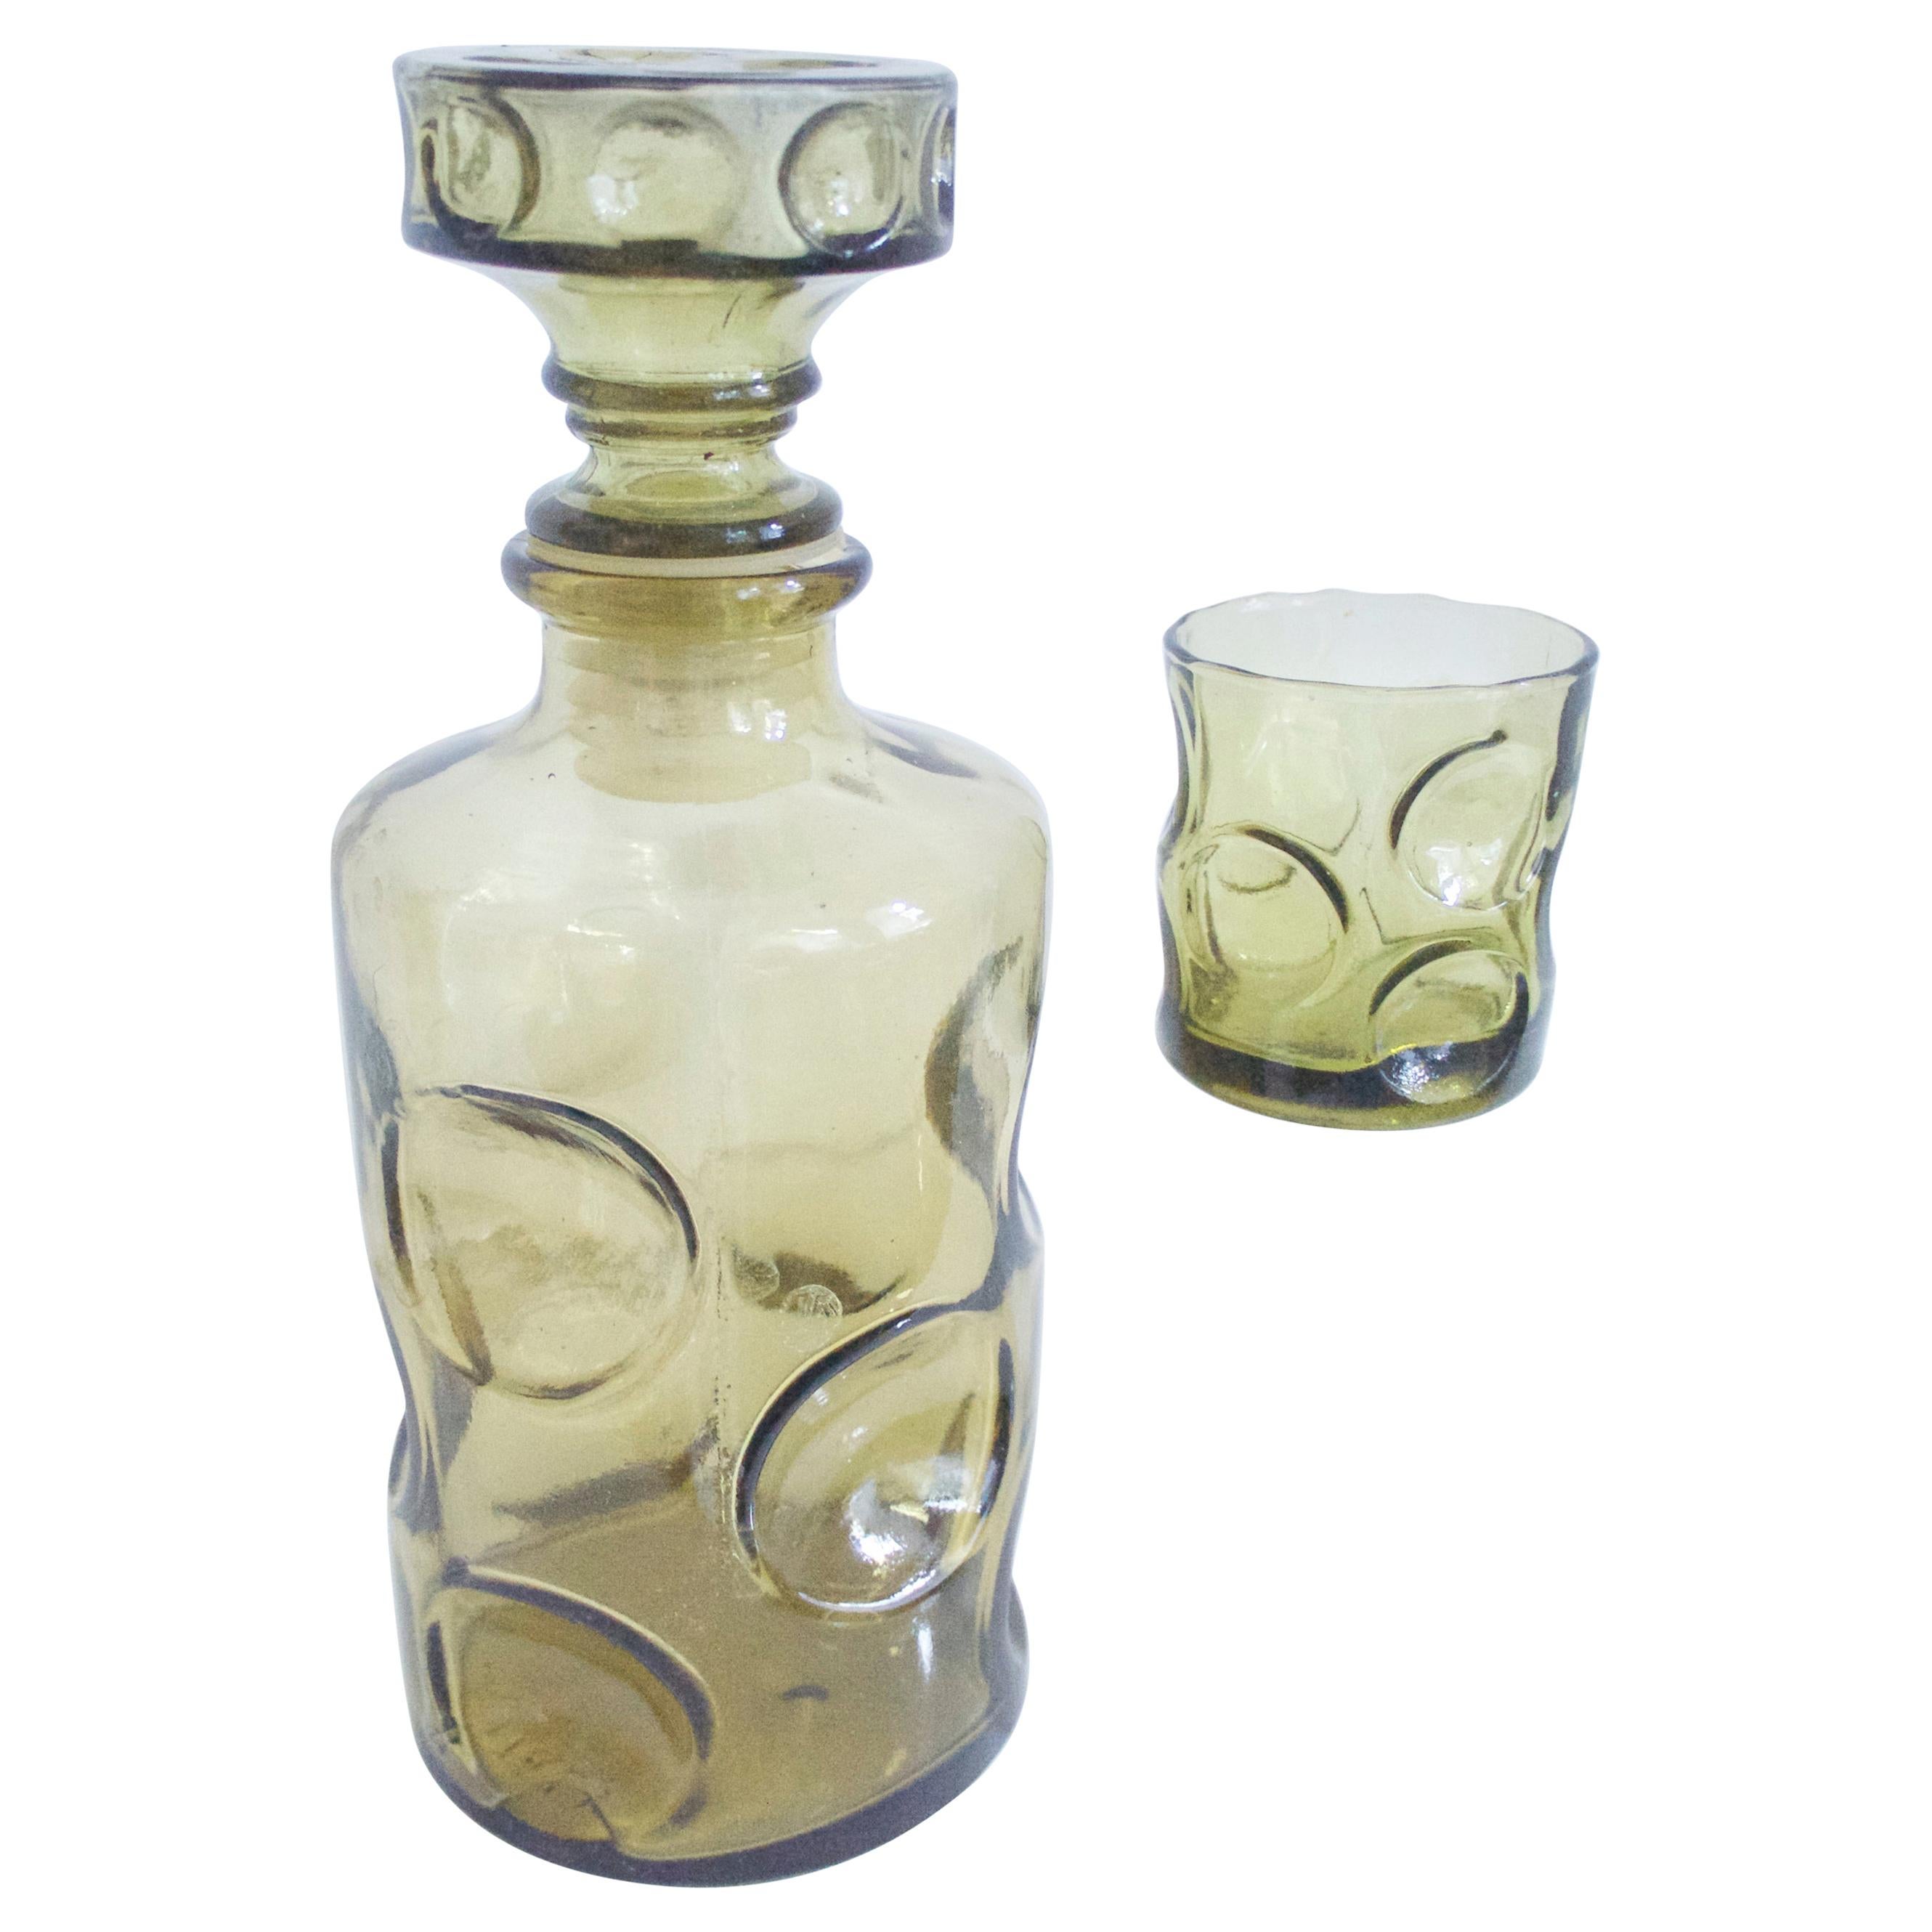 Modernist Empoli 'Dimpled' Vase Decanter and Glass for One 1950s Pressed Glass